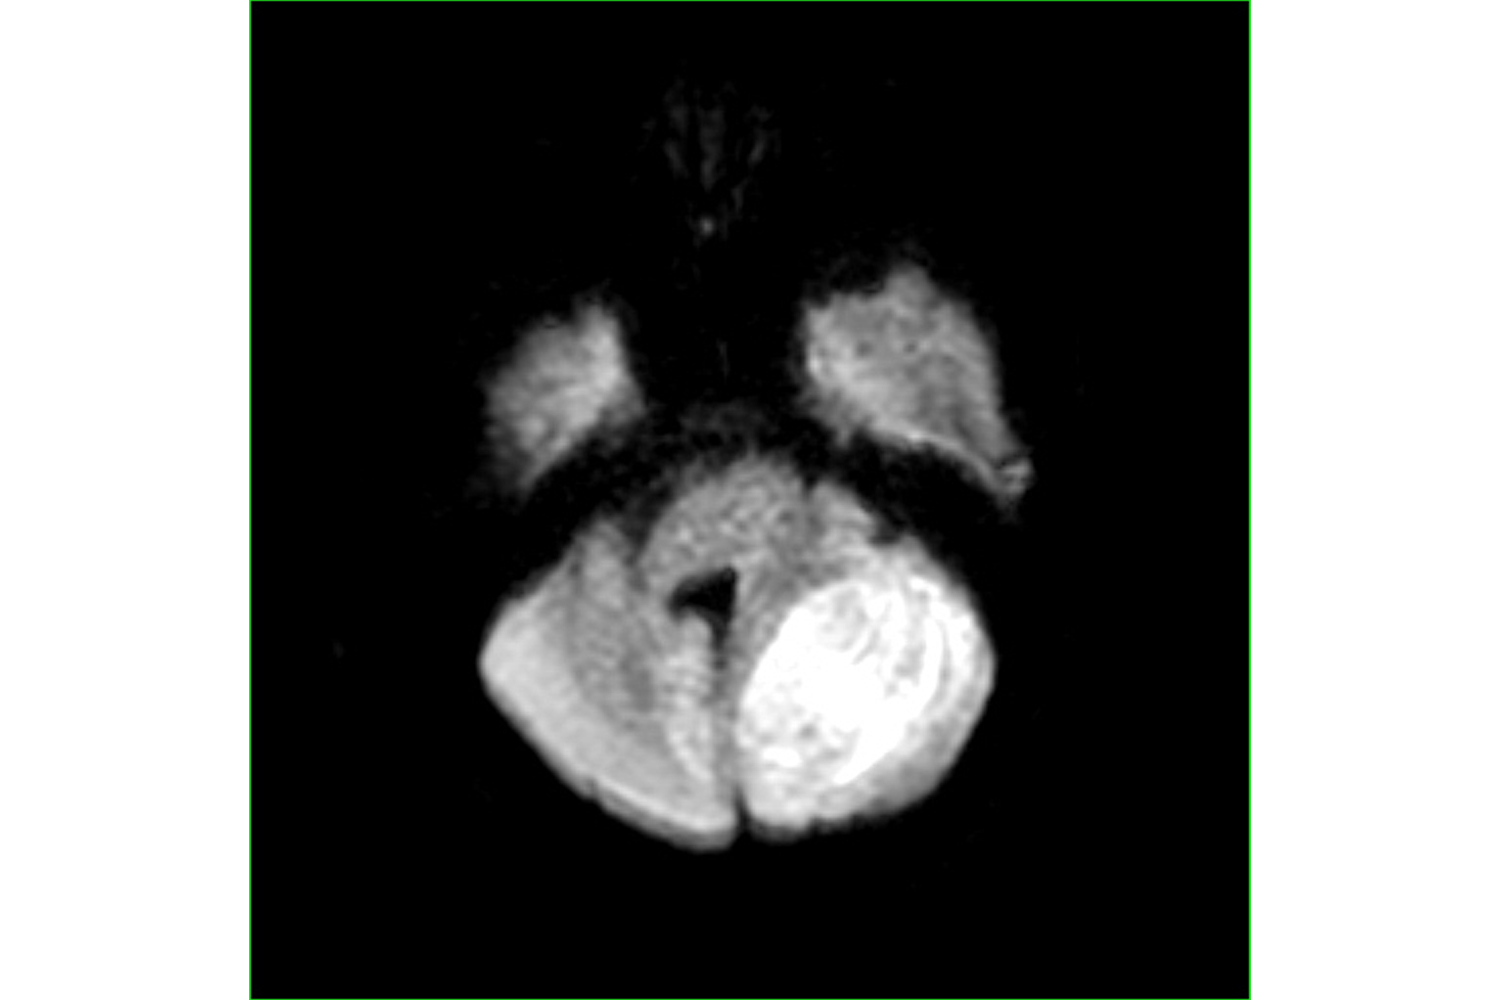 Assessment with MR Imaging: Diffusion-Weighted Image